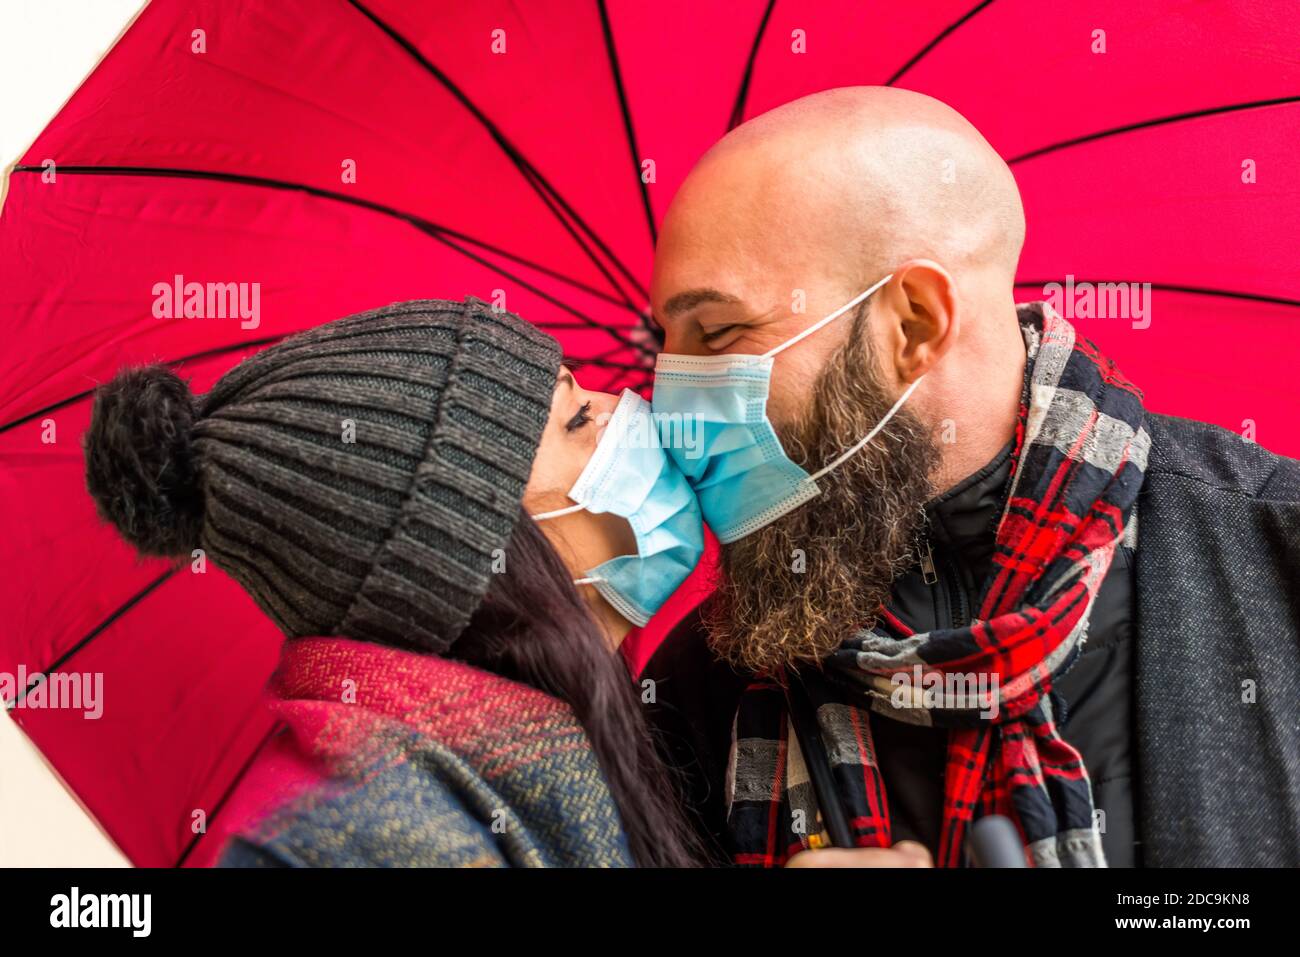 isolated close up portrait of a young adult couple kissing each other with passion wearing protective face mask.hipster man and caucasian woman Stock Photo